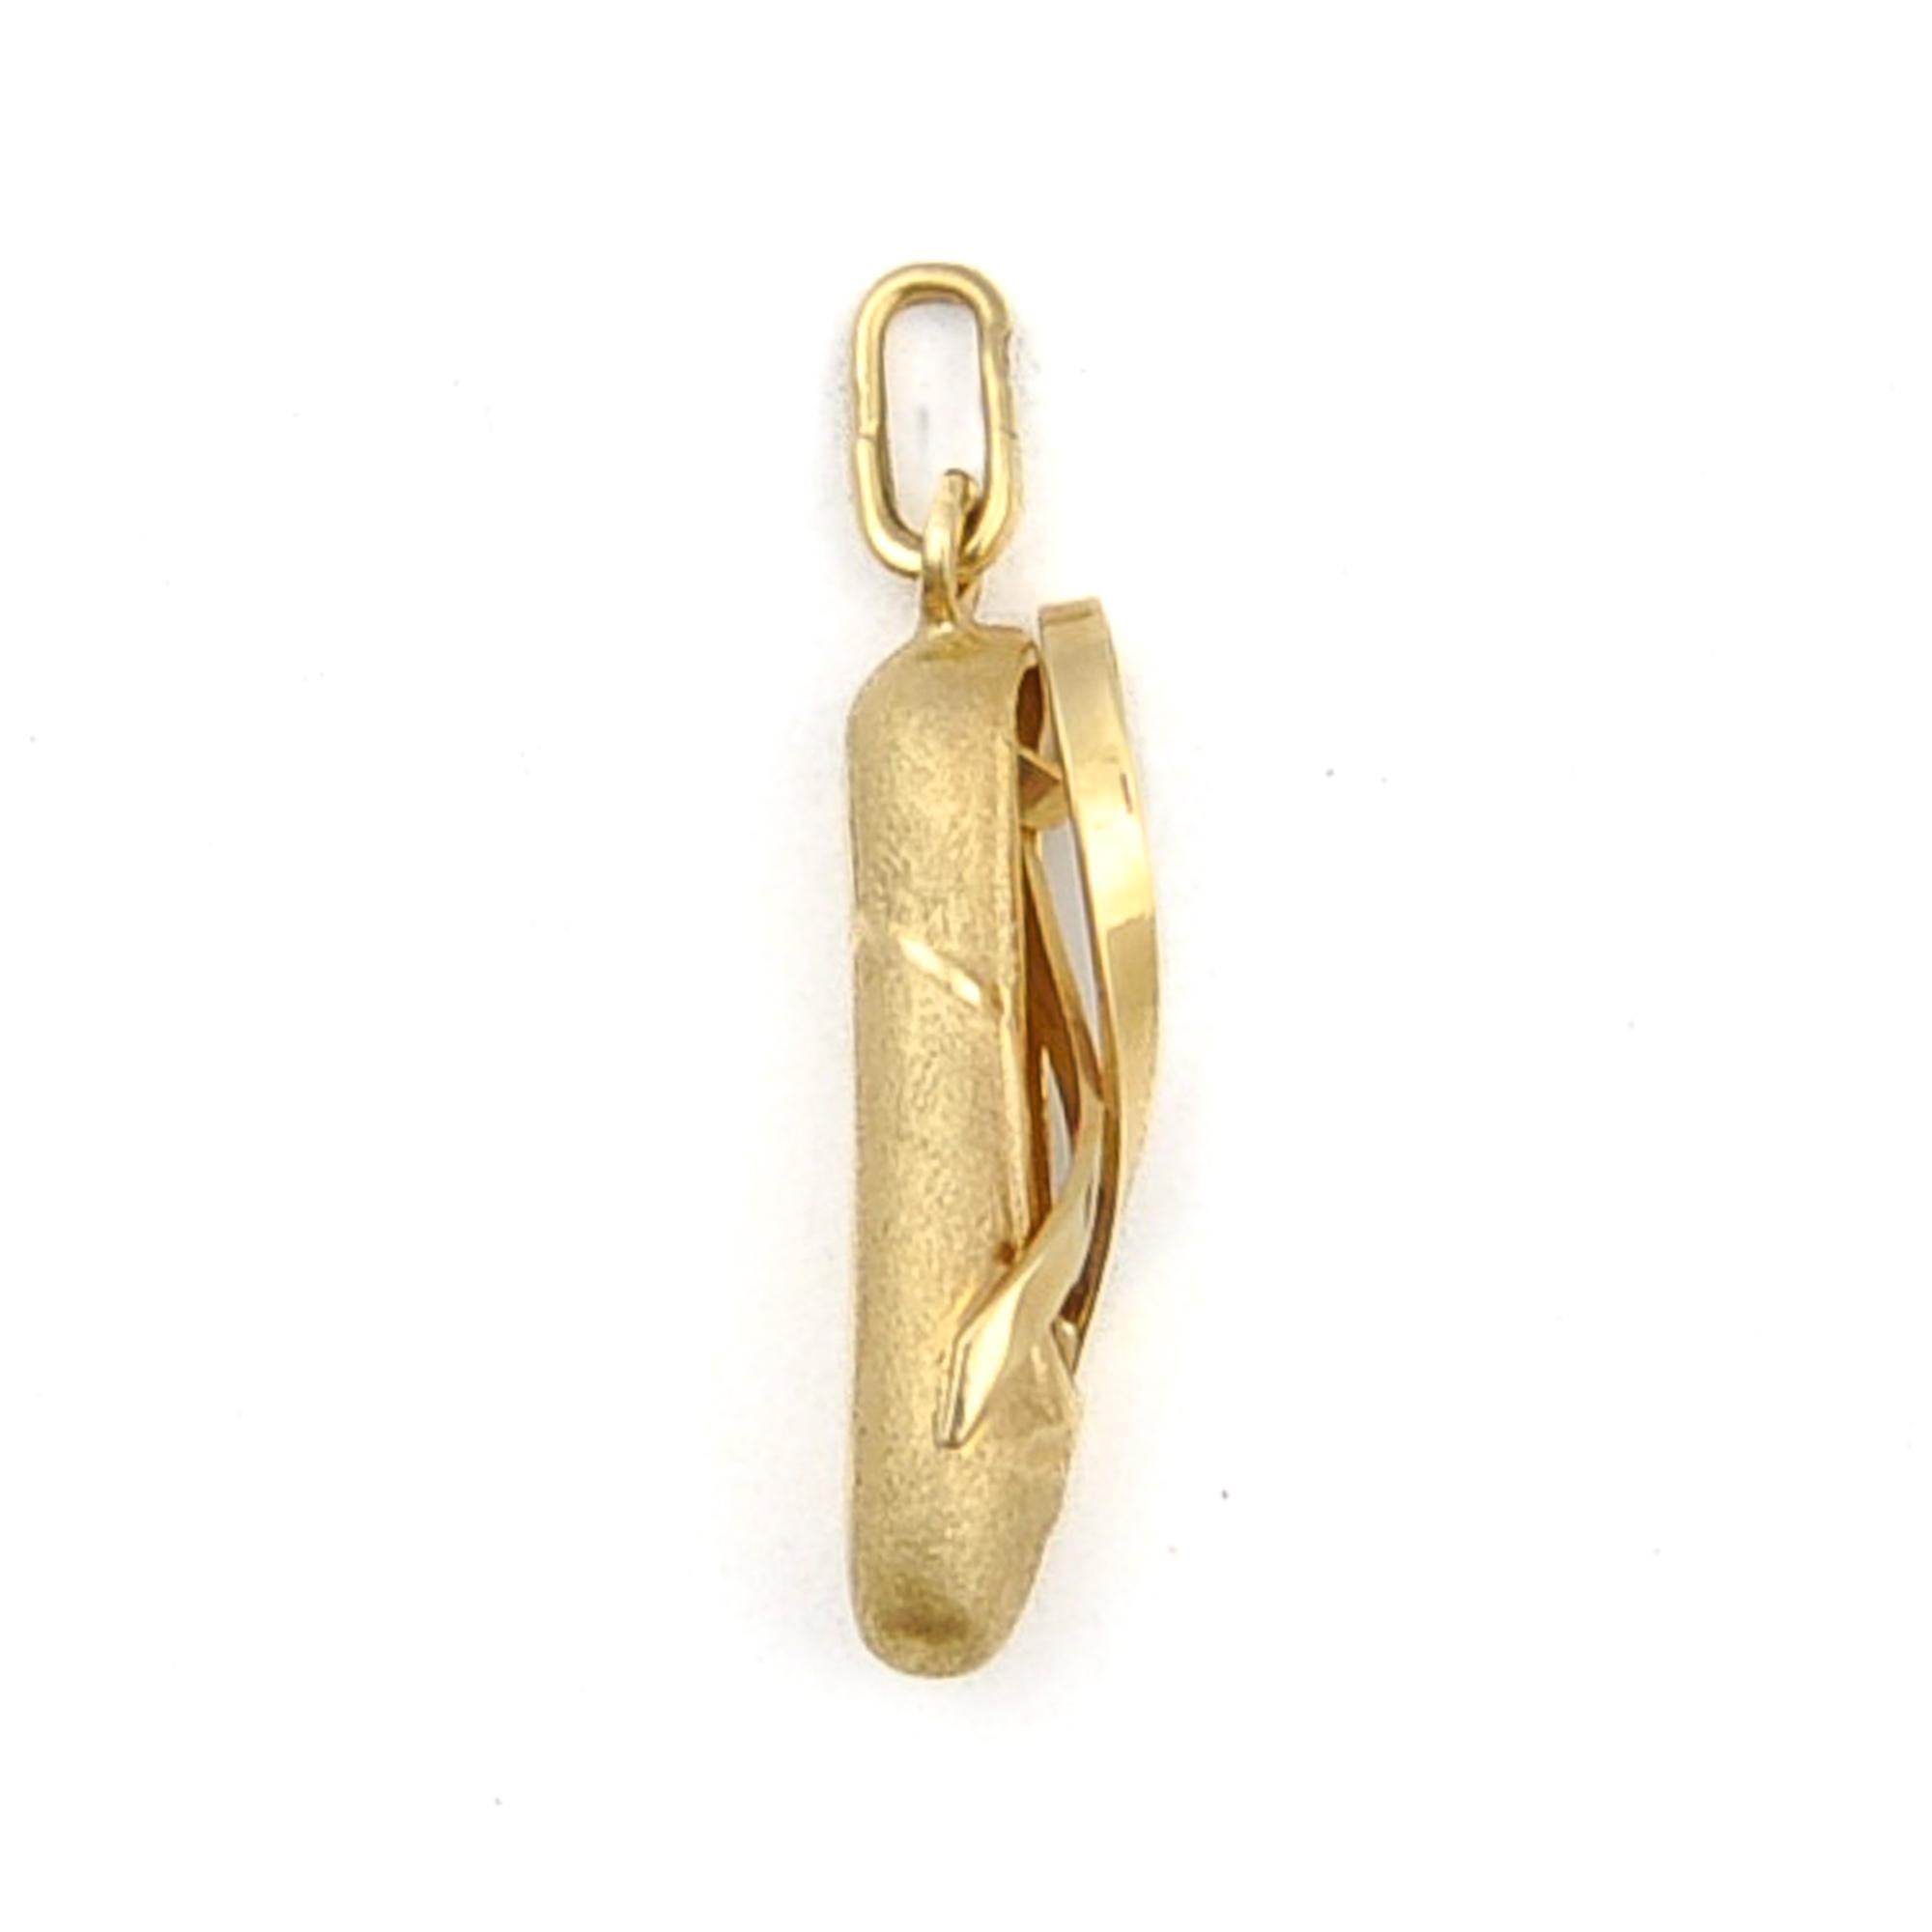 A three-dimensional satined gold pointe ballet shoe charm pendant. Every ballet dancer want a keepsake to celebrate the love of ballet. The dancing shoe is beautifully detailed with a ribbon to wrap around the ankle and pointe toe. The shoe is made